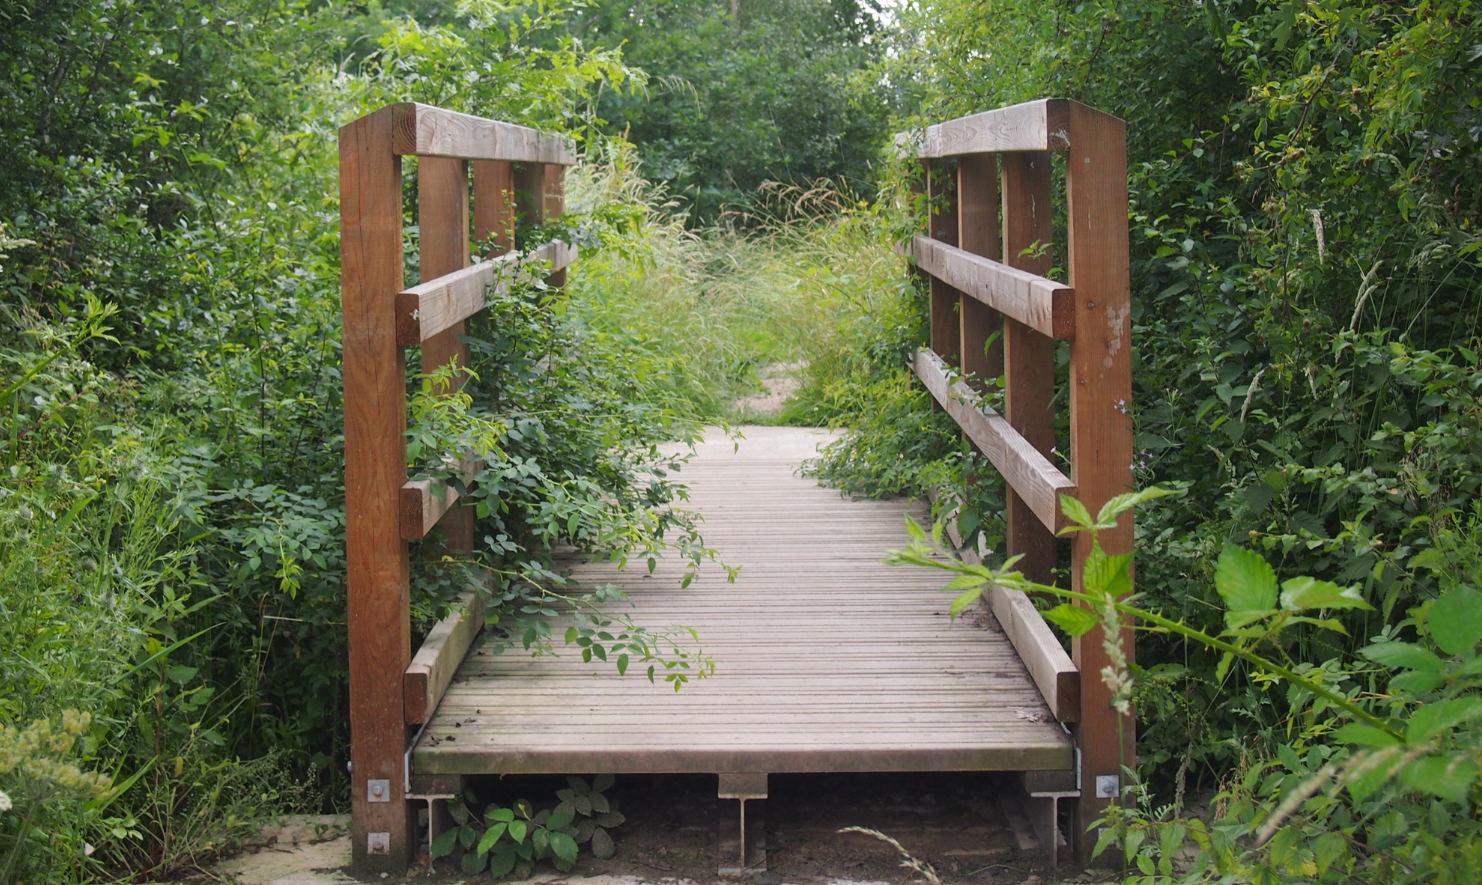 A wooden bridge over a brook with hedges either side.